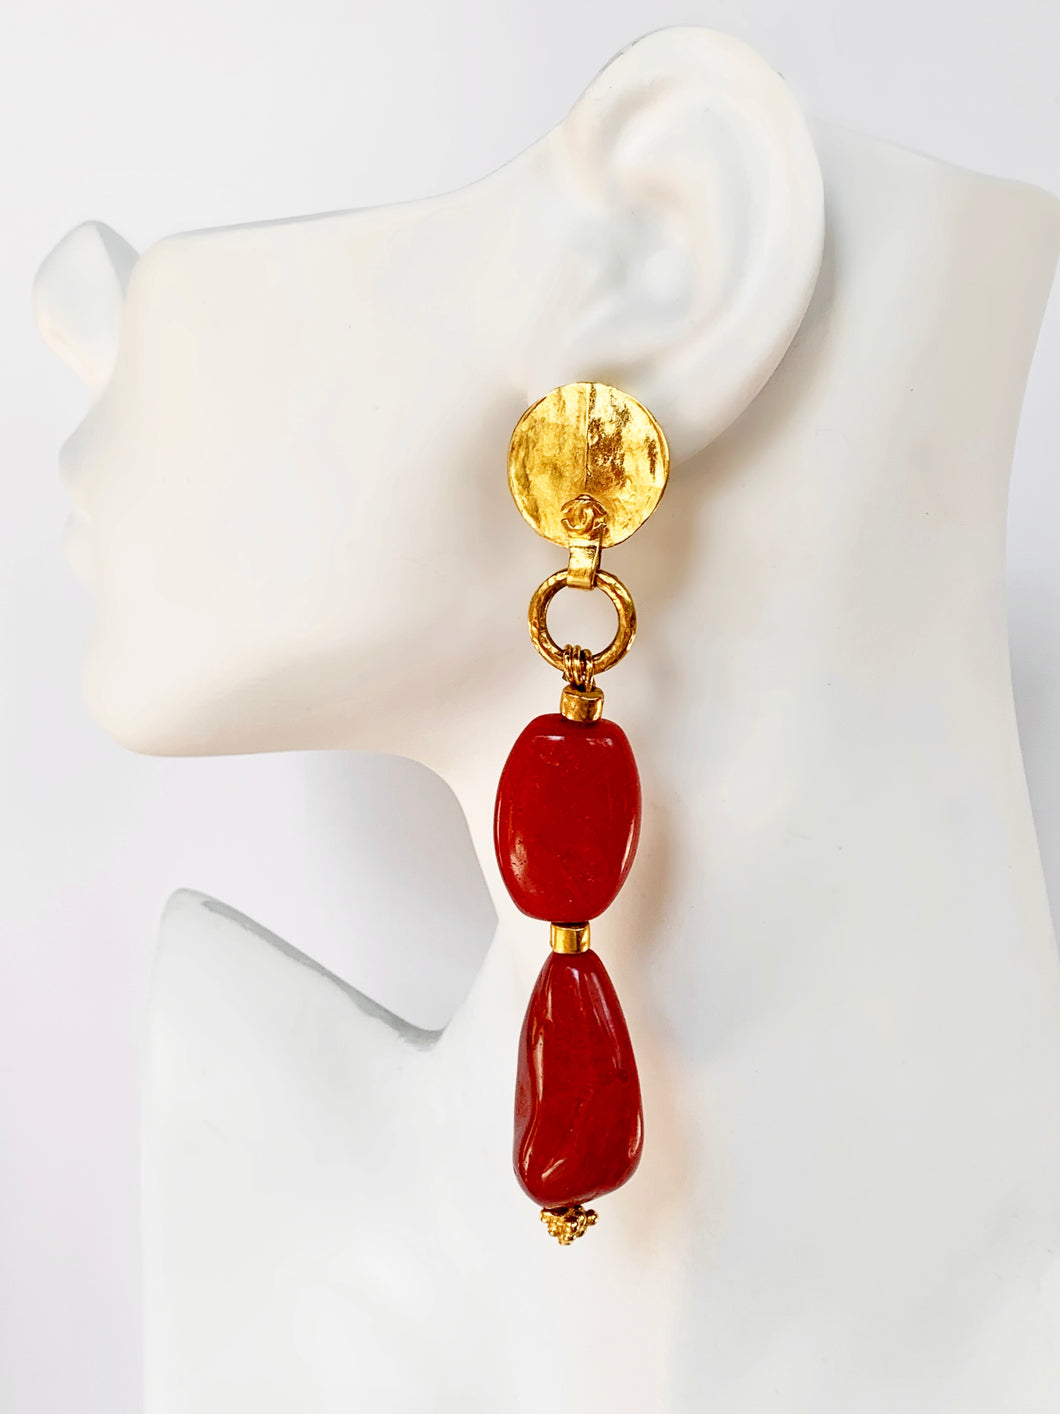 CHANEL SHOULDER DUSTER CRIMSON RED LACQUER PEBBLE EARRINGS 1998 PRISTINE